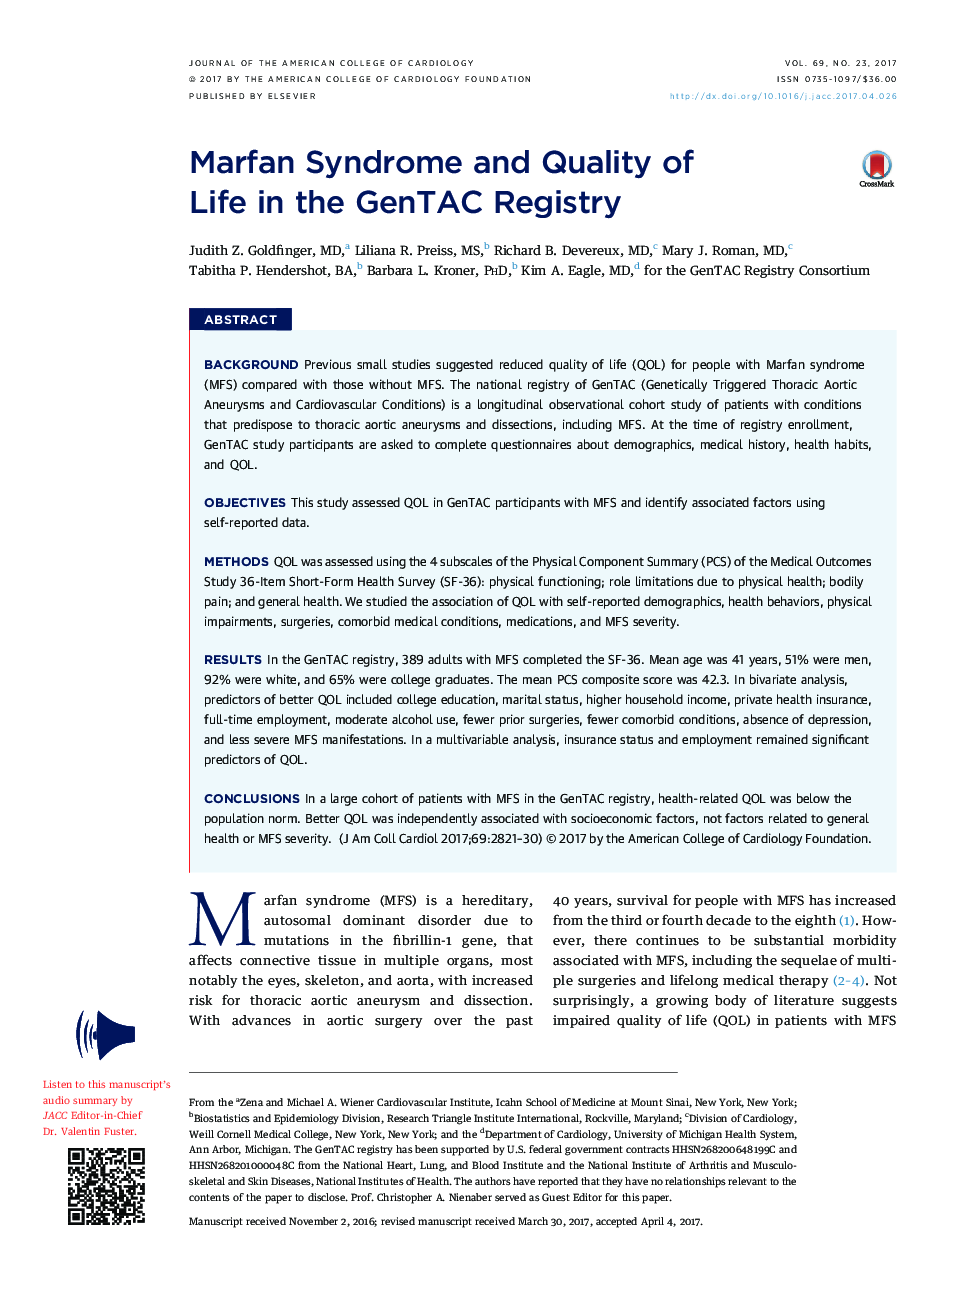 Marfan Syndrome and Quality of Life in the GenTAC Registry